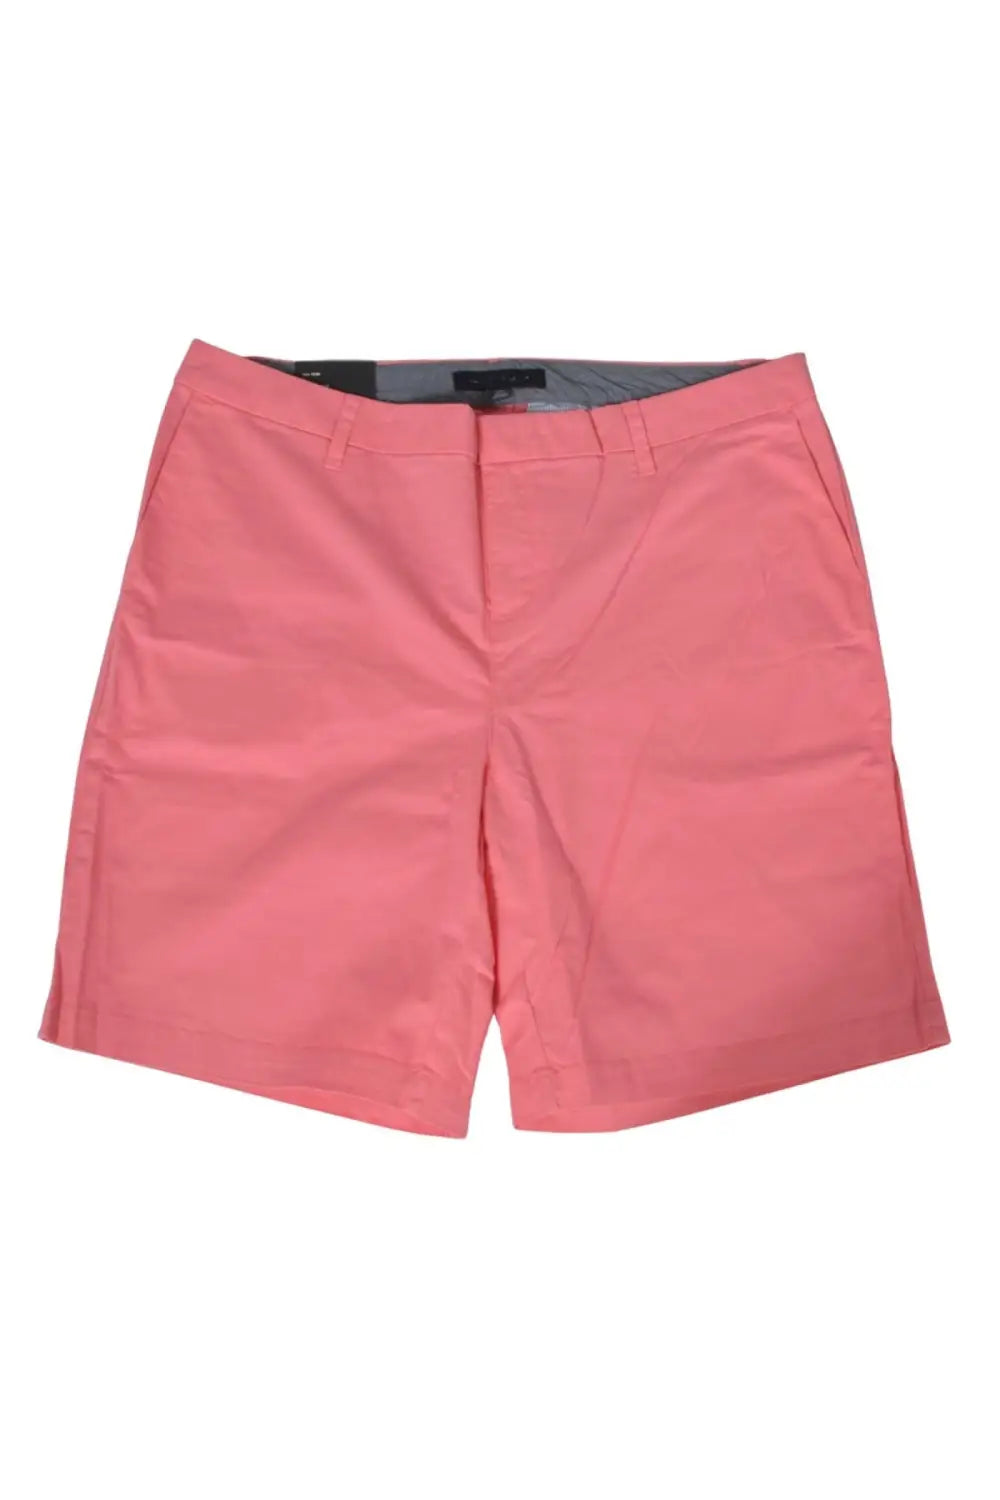 Tommy Hilfiger Curve Chino Shorts